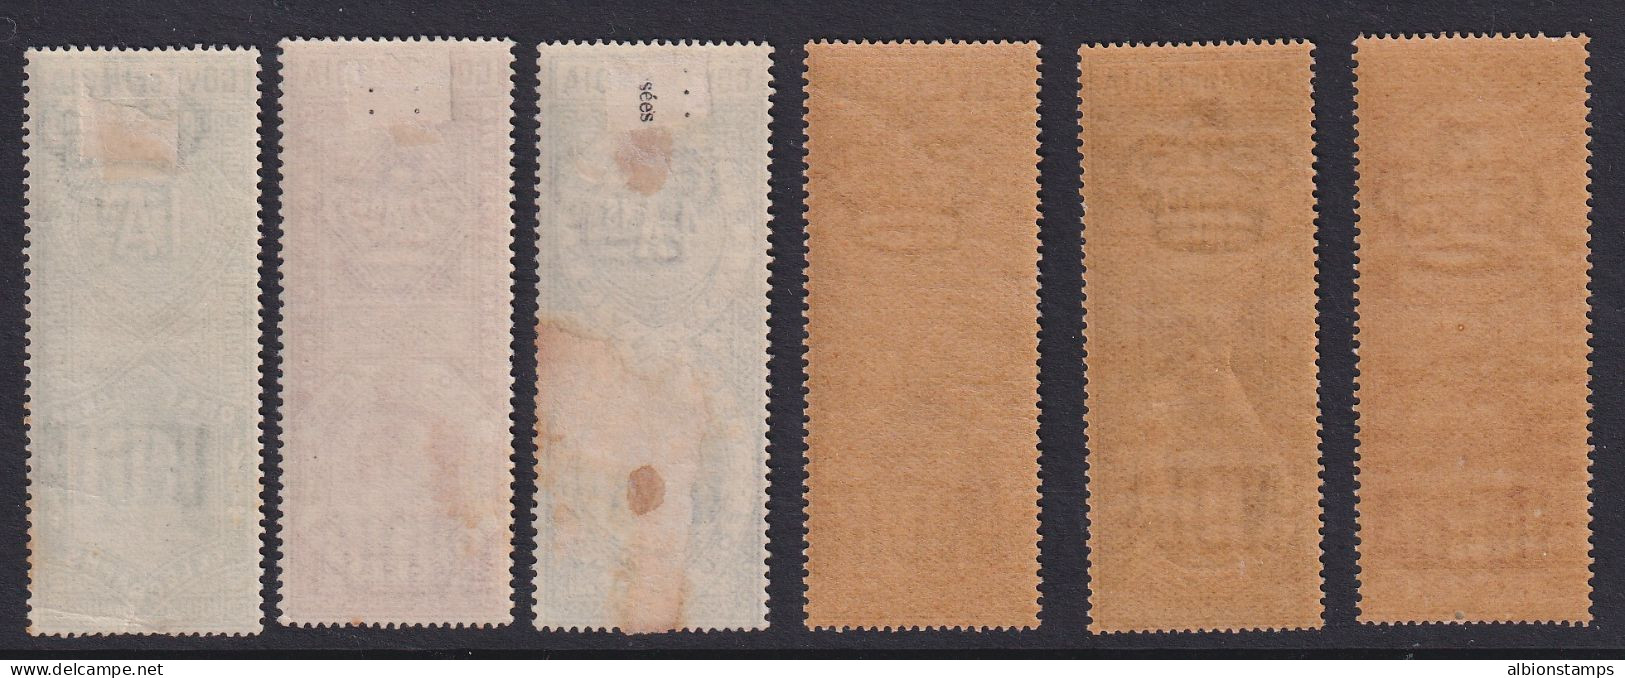 India, SG T56-T61, MHR/NH (few Toned Gum), Telegraph Stamps - 1902-11 King Edward VII